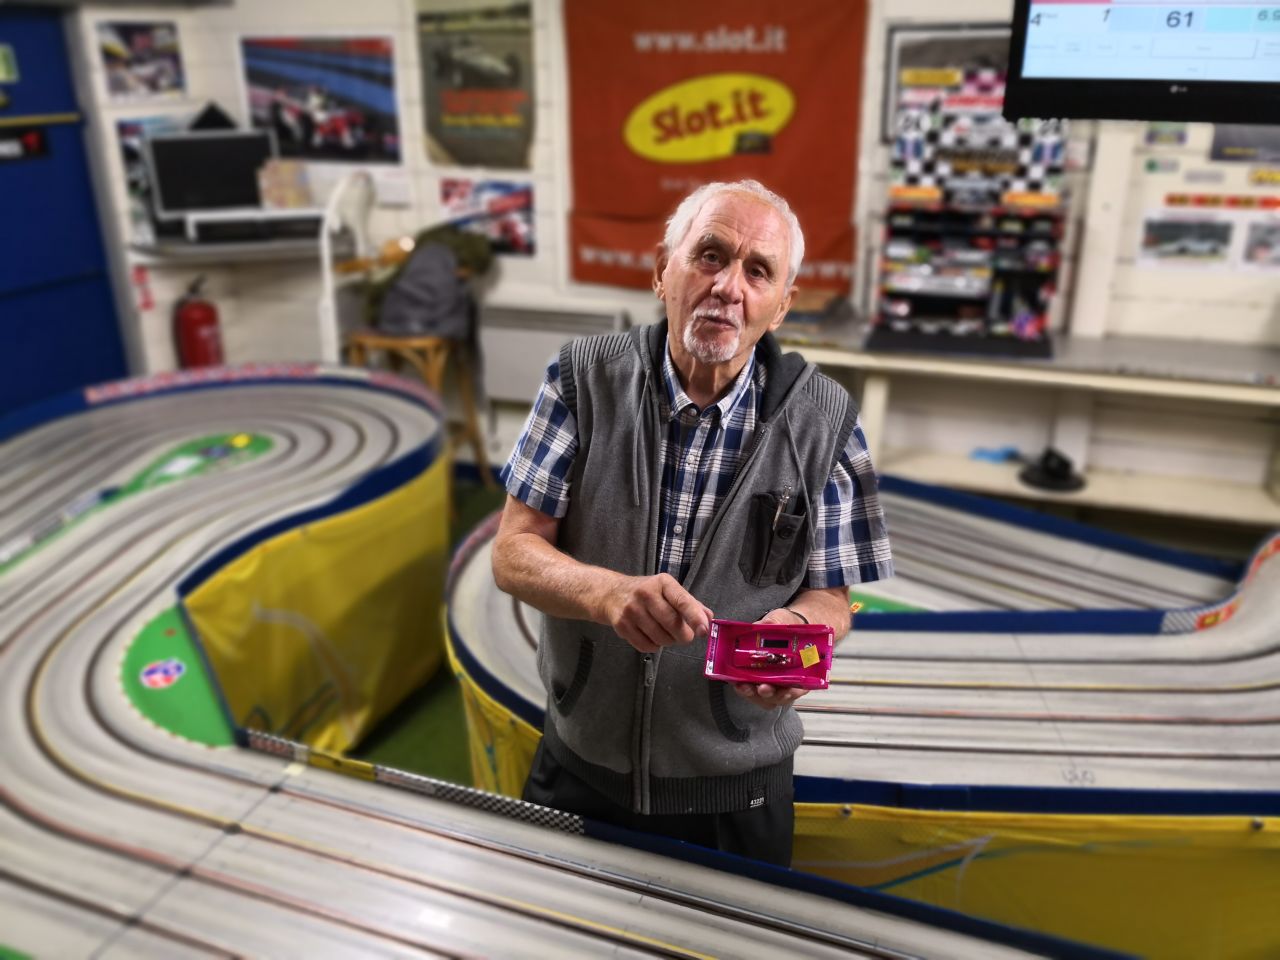 Londoner John Chance-Reed, 87, is the oldest registered member of the <a href="http://www.slotcarracing.org.uk/index.htm" target="_blank" target="_blank">British Slot Car Racing Association</a>, a collection of enthusiasts in a sport that saw its heyday in the 1960s.